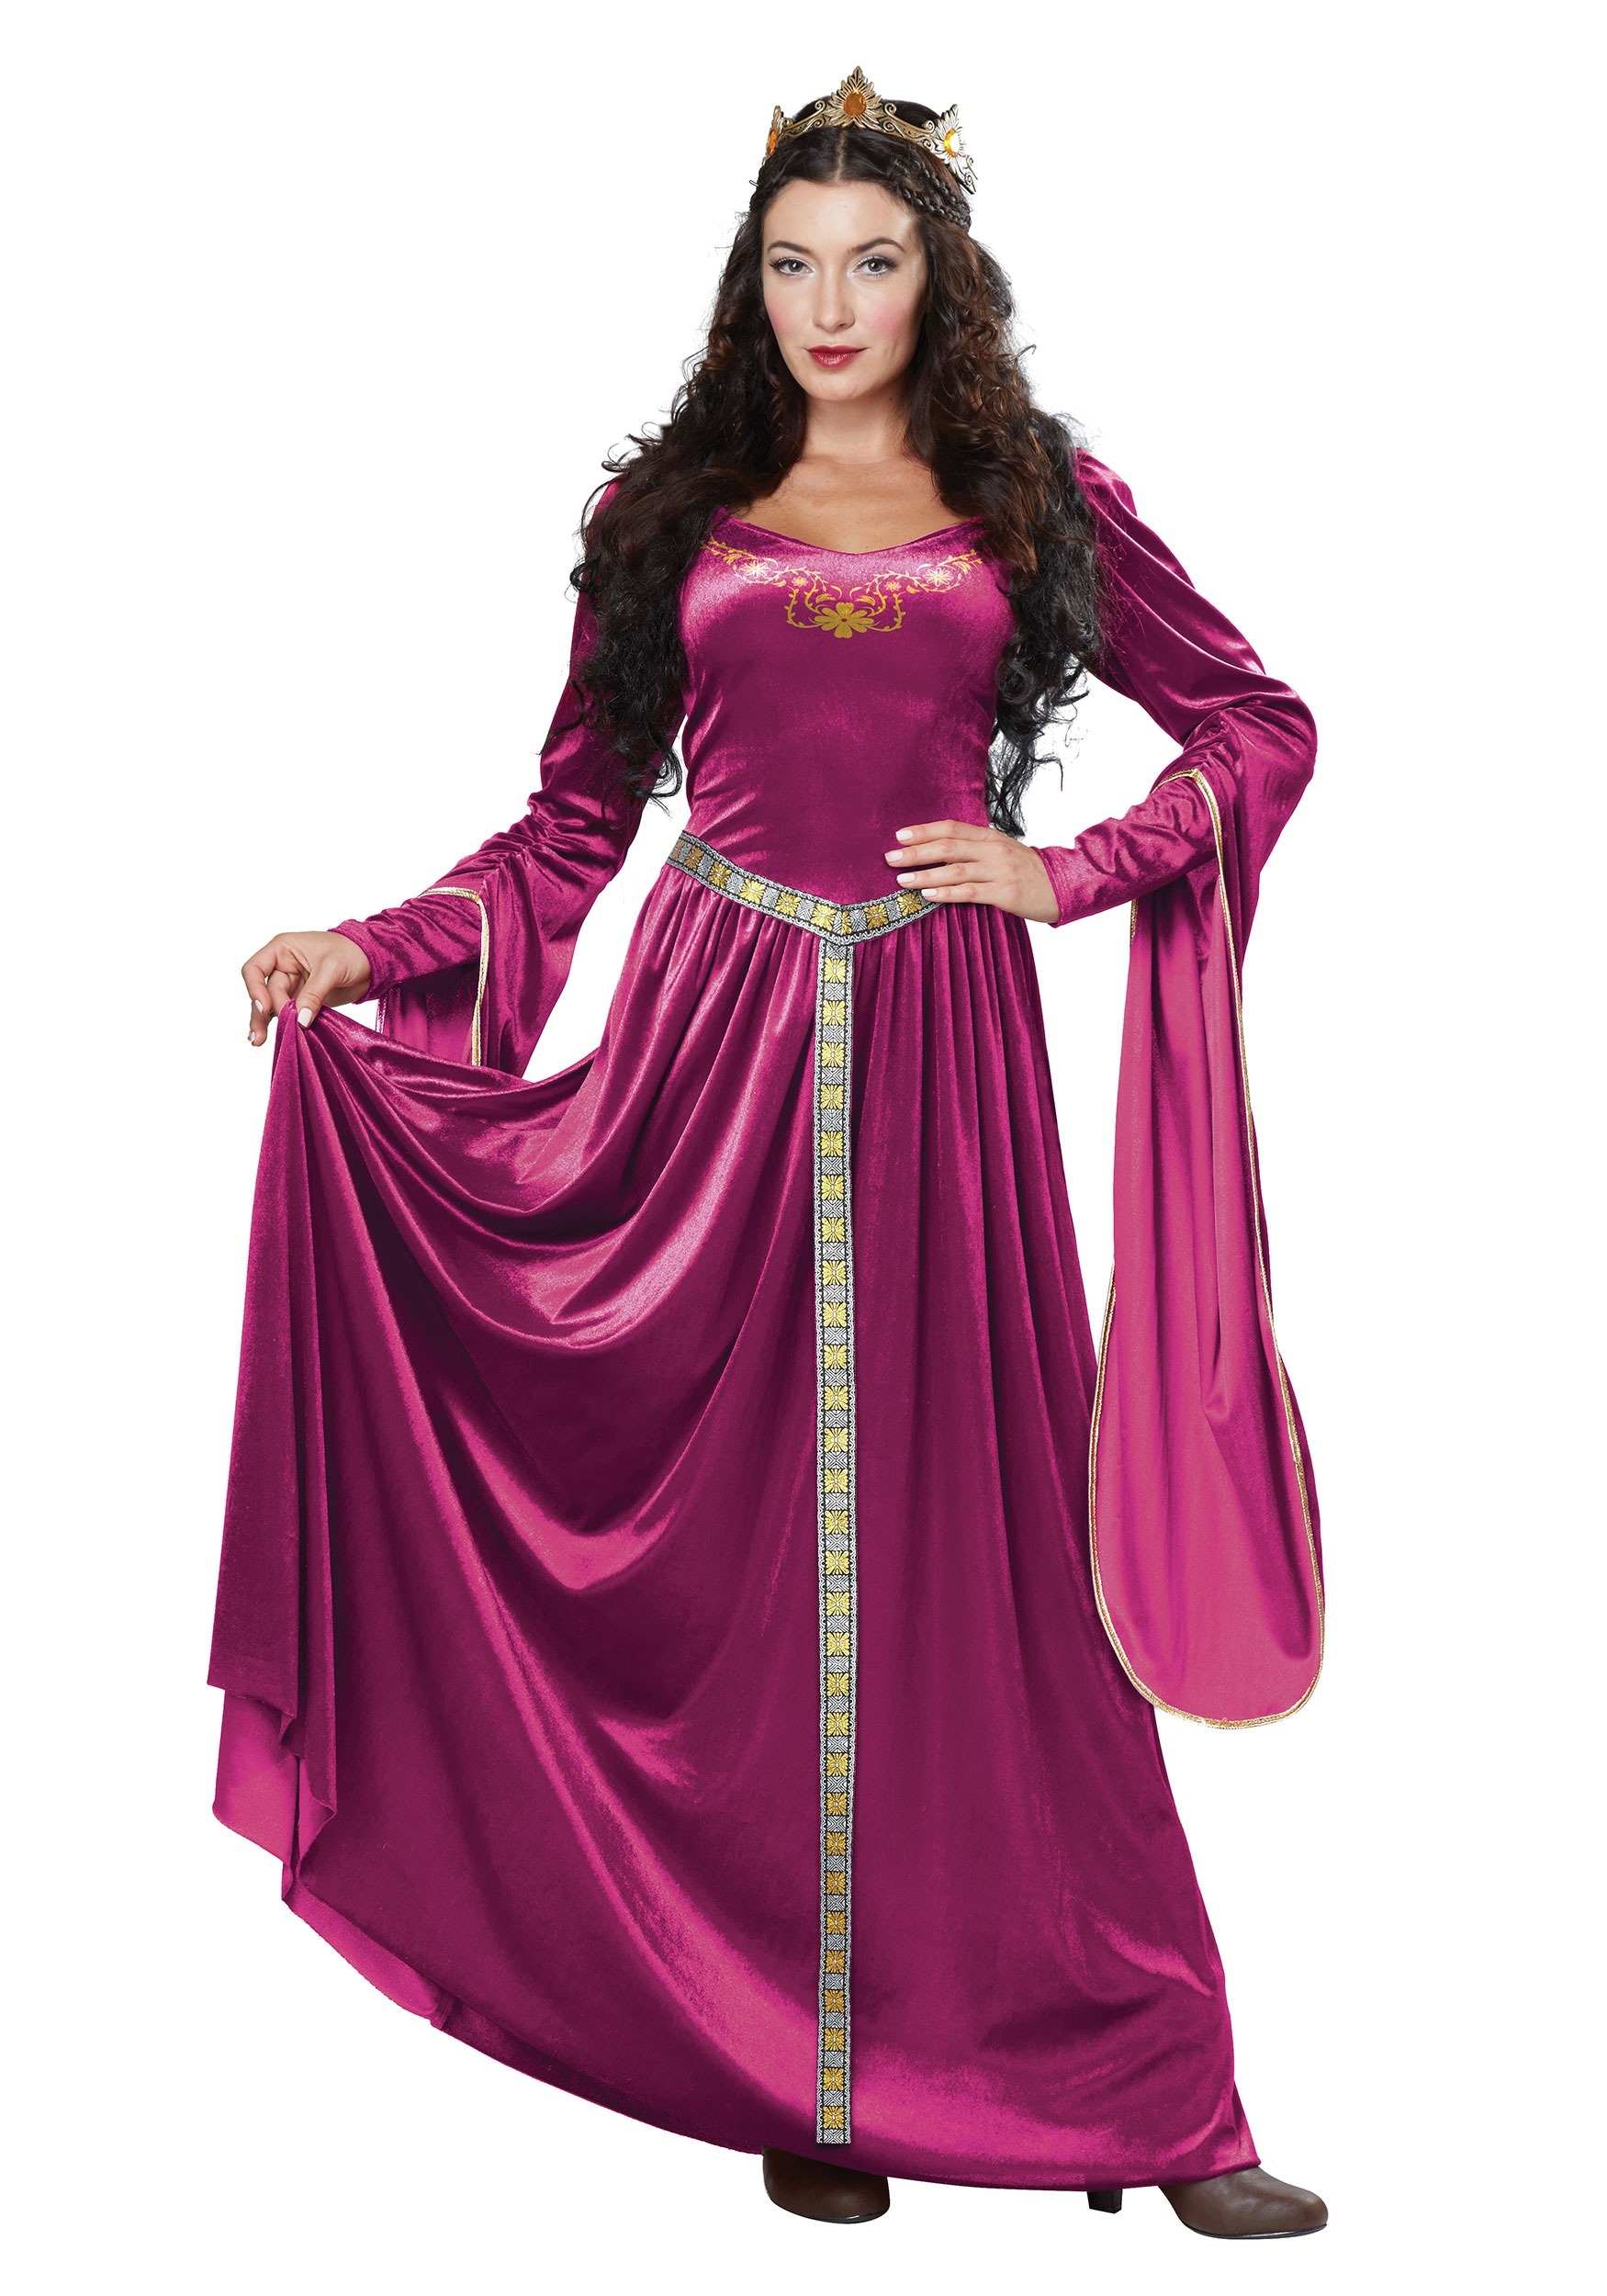 Photos - Fancy Dress California Costume Collection Lady Guinevere Costume Dress for Women Purpl 